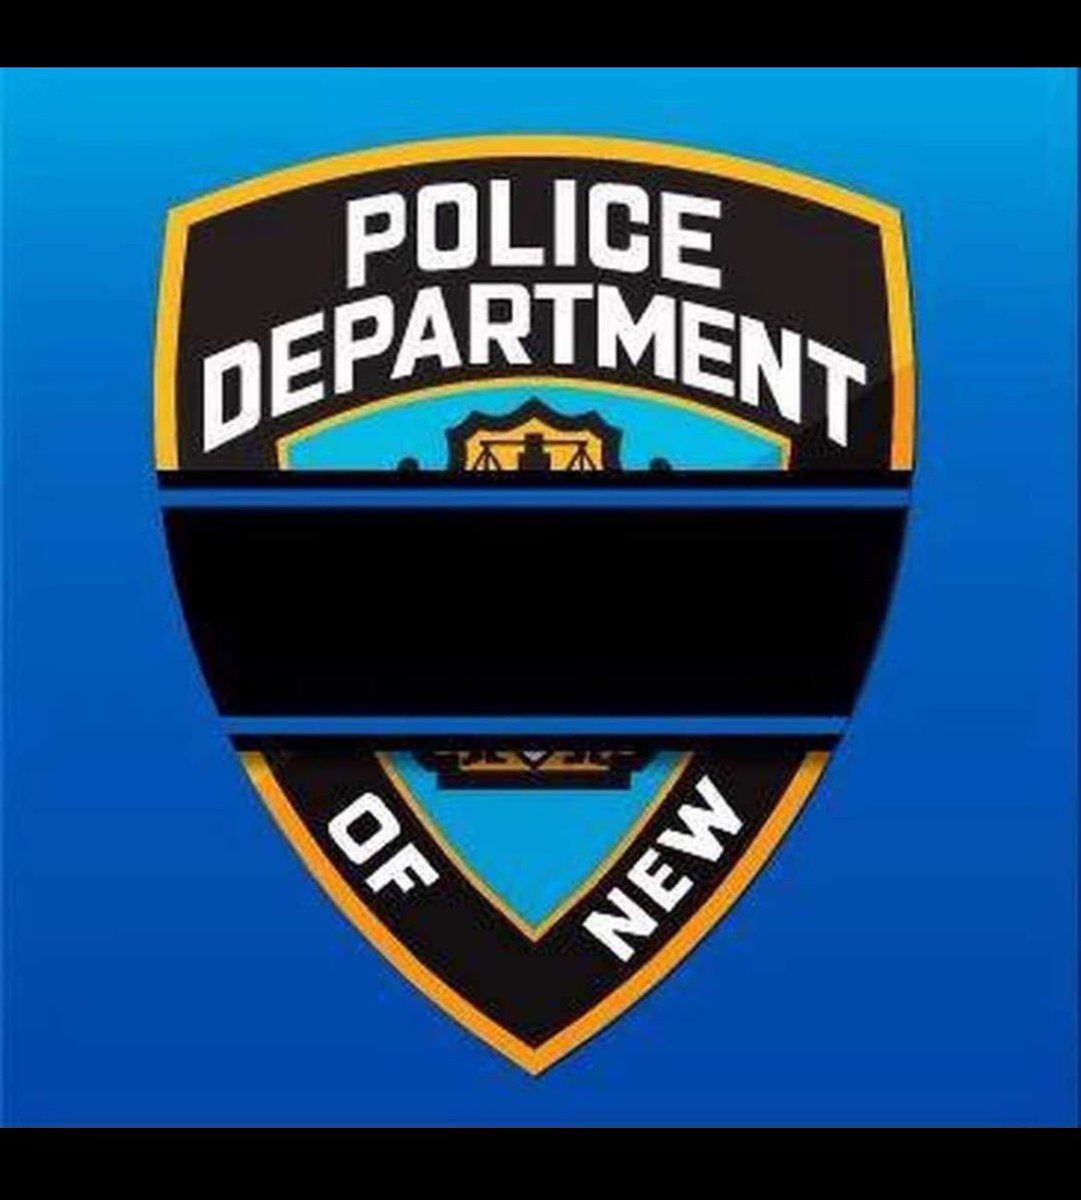 It’s truly a sad day for the city when we lose one of our Finest. My prayers are with the family, friends and NYPD family of fatally shot P.O. Jonathan Diller.